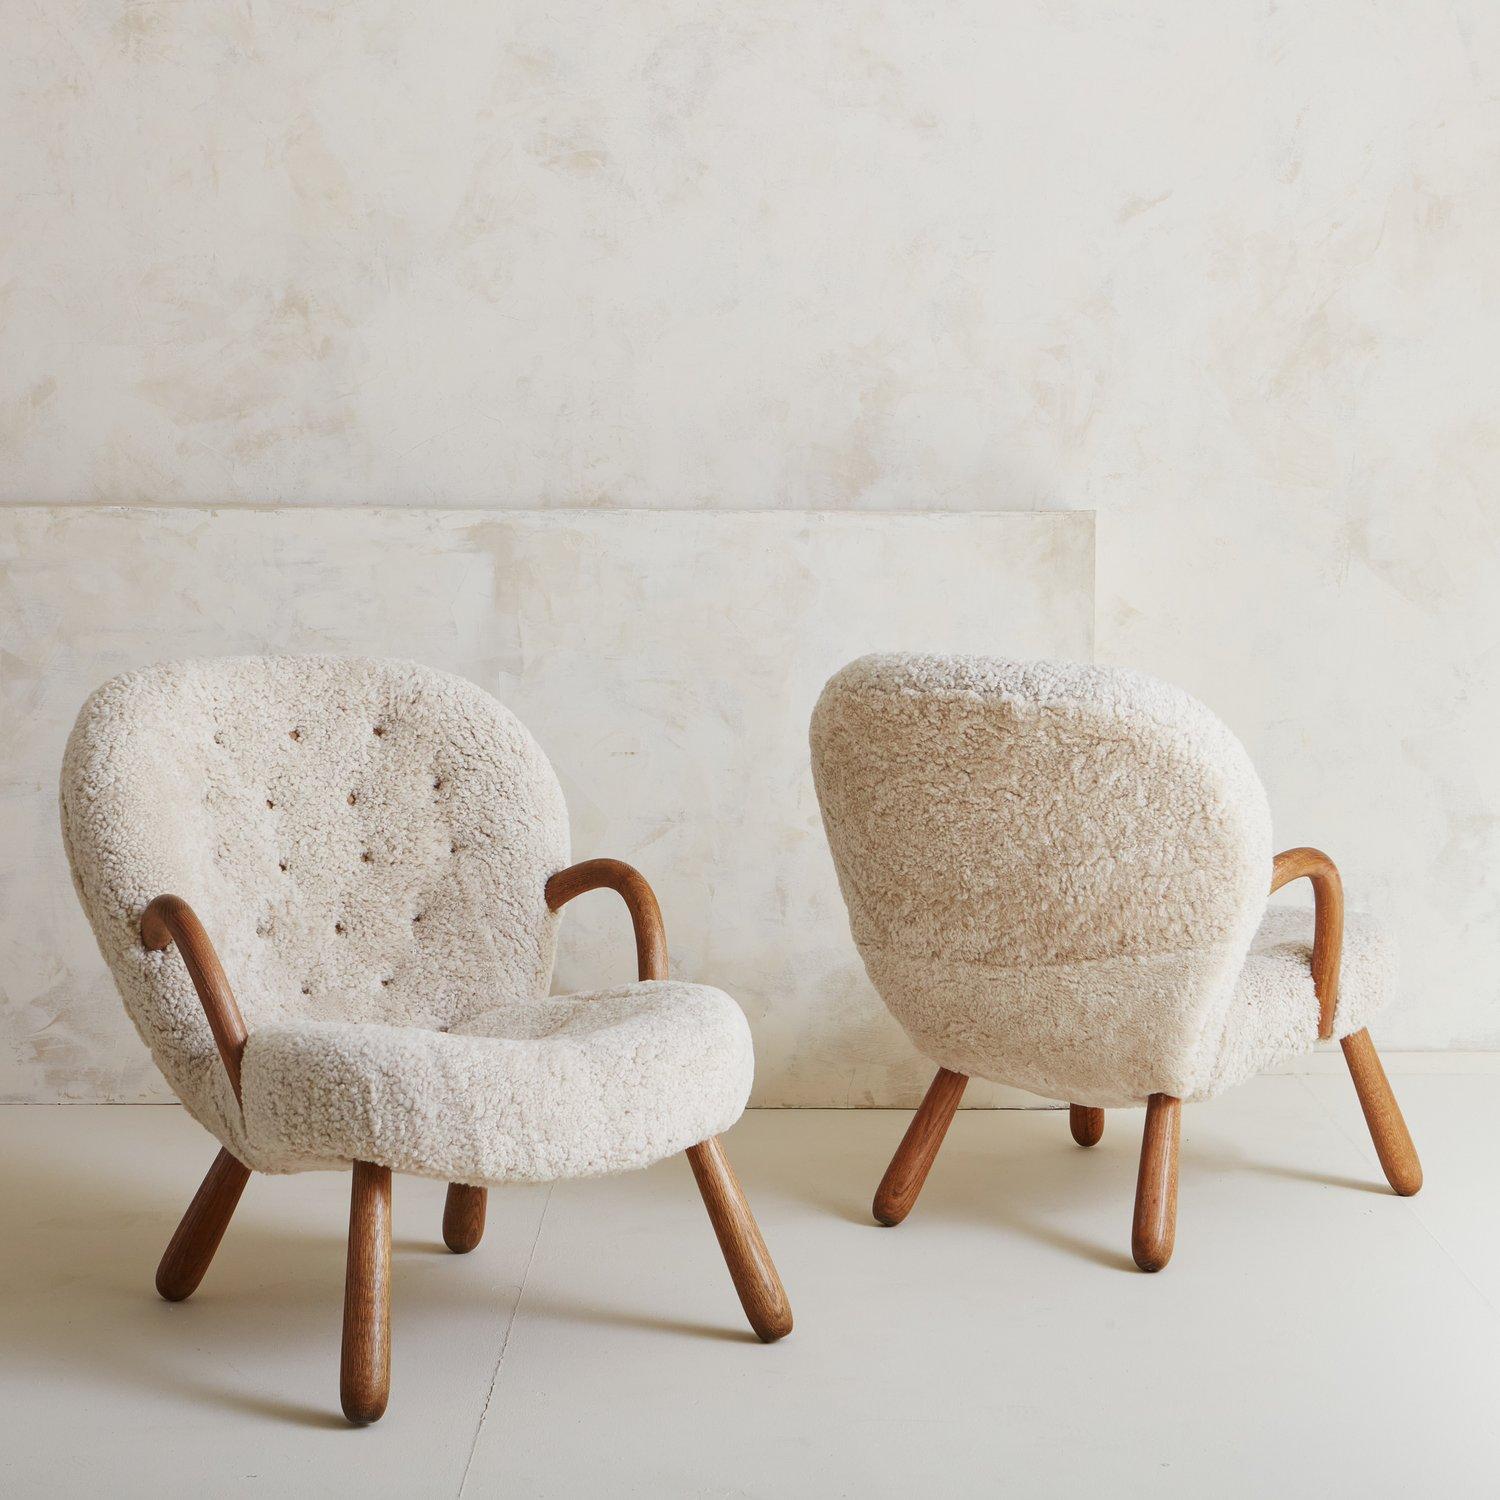 Pair of Vintage Clam Chairs in Shearling by Philip Arctander, Denmark 1944 6